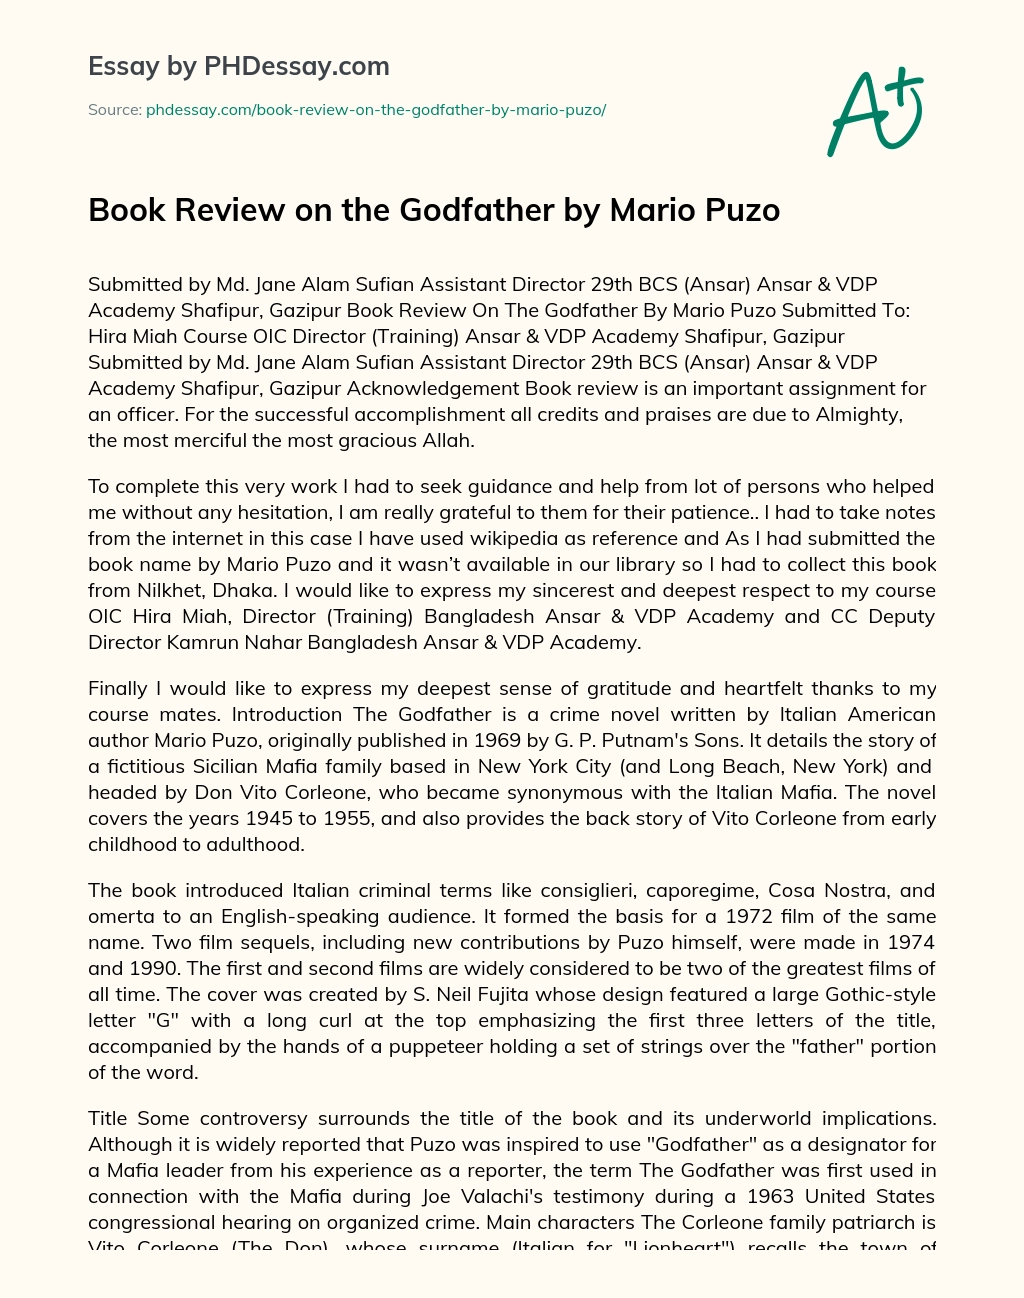 Book Review on the Godfather by Mario Puzo essay